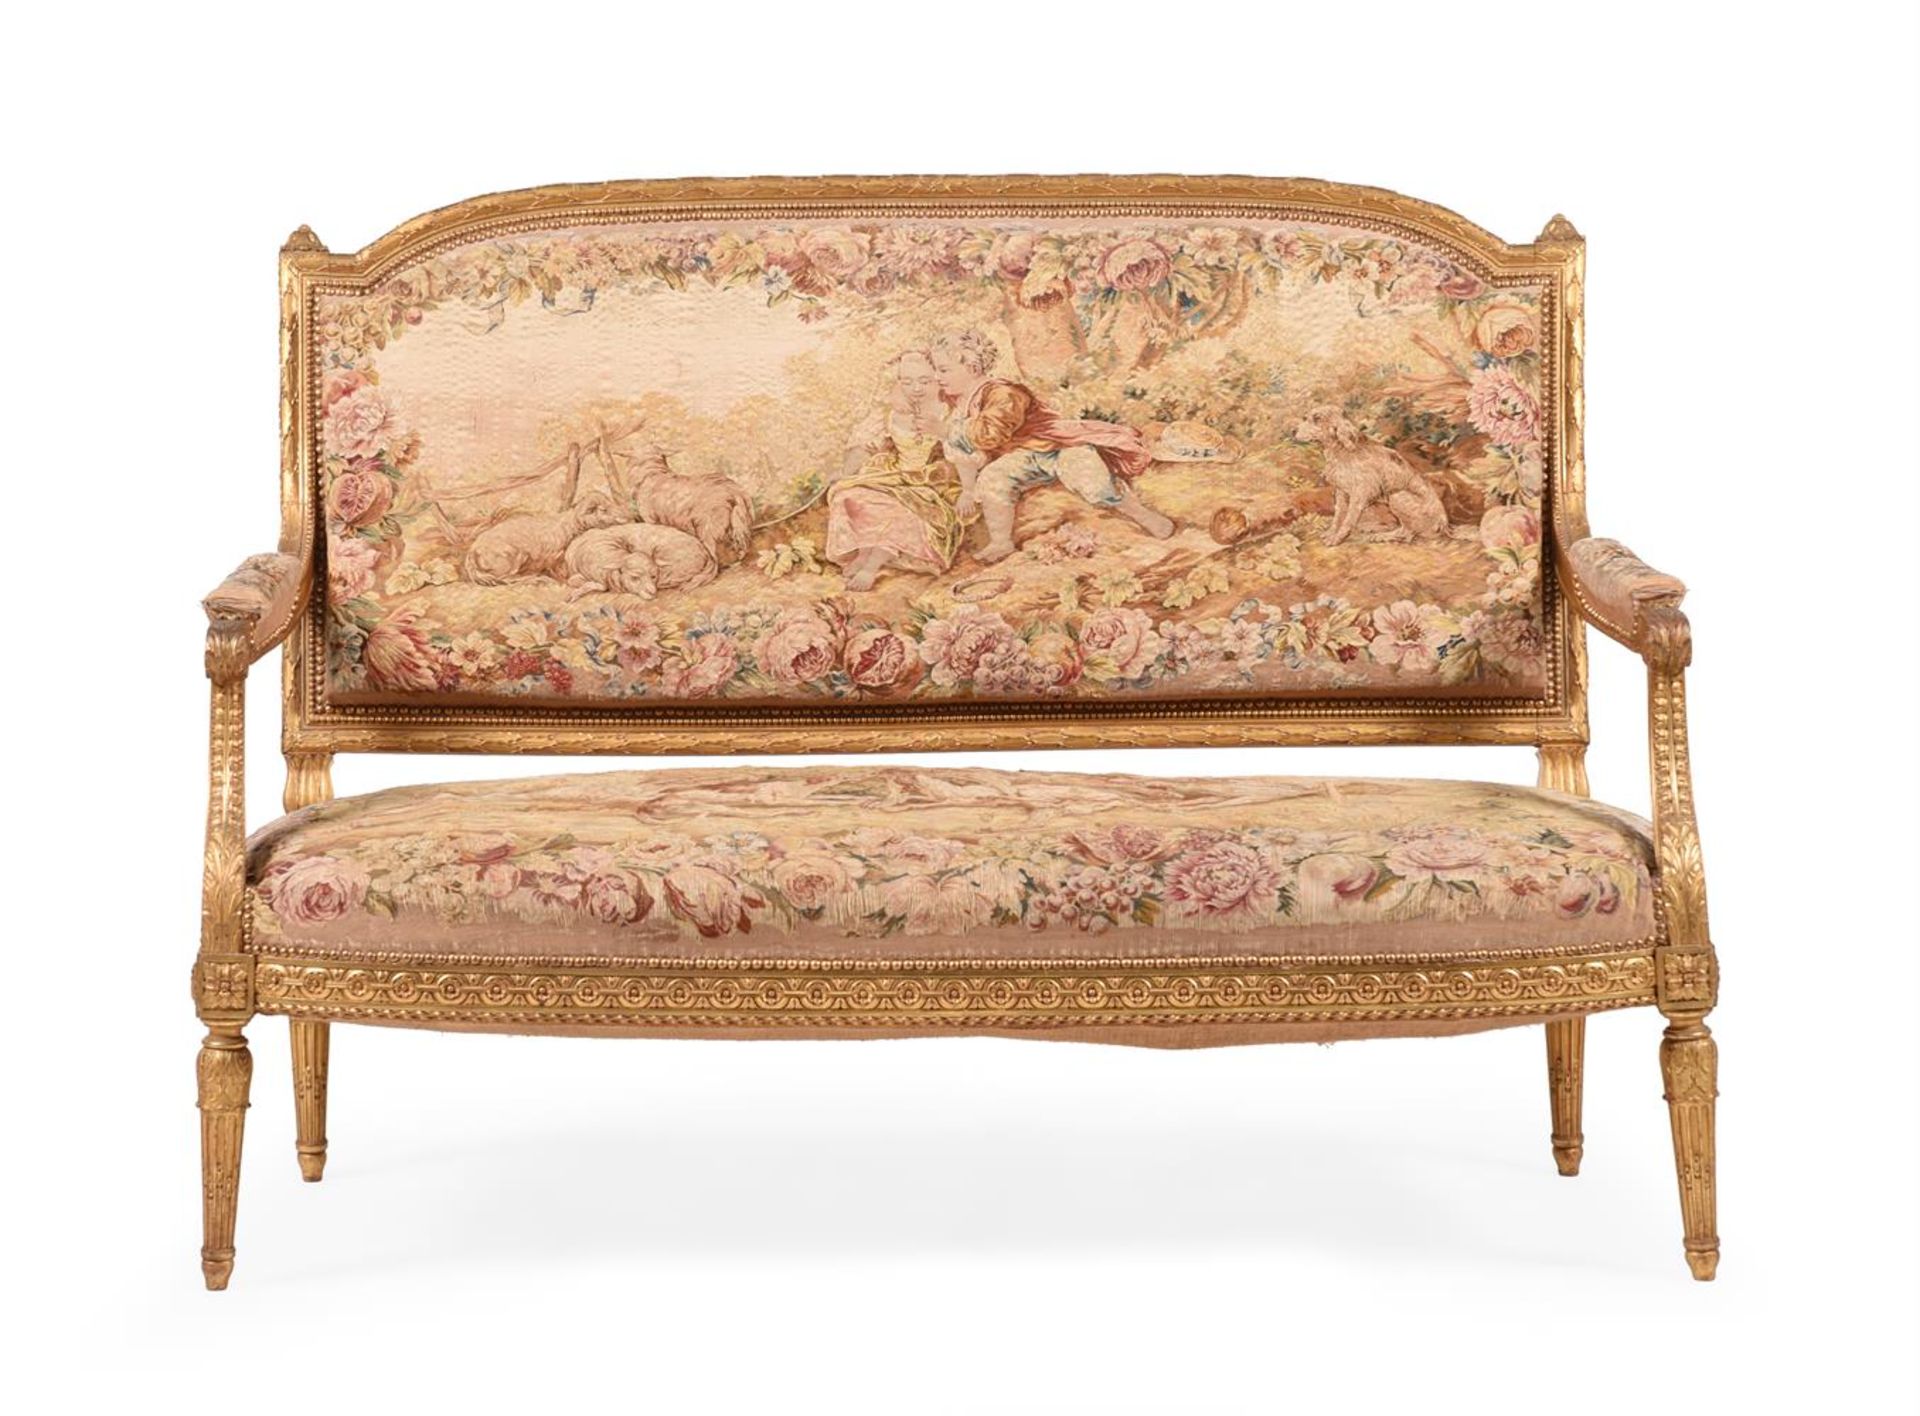 A FRENCH TRANSITIONAL AUBUSSON UPHOLSTERED GILTWOOD SALON SUITE, IN LOUIS XVI STYLE - Image 10 of 10